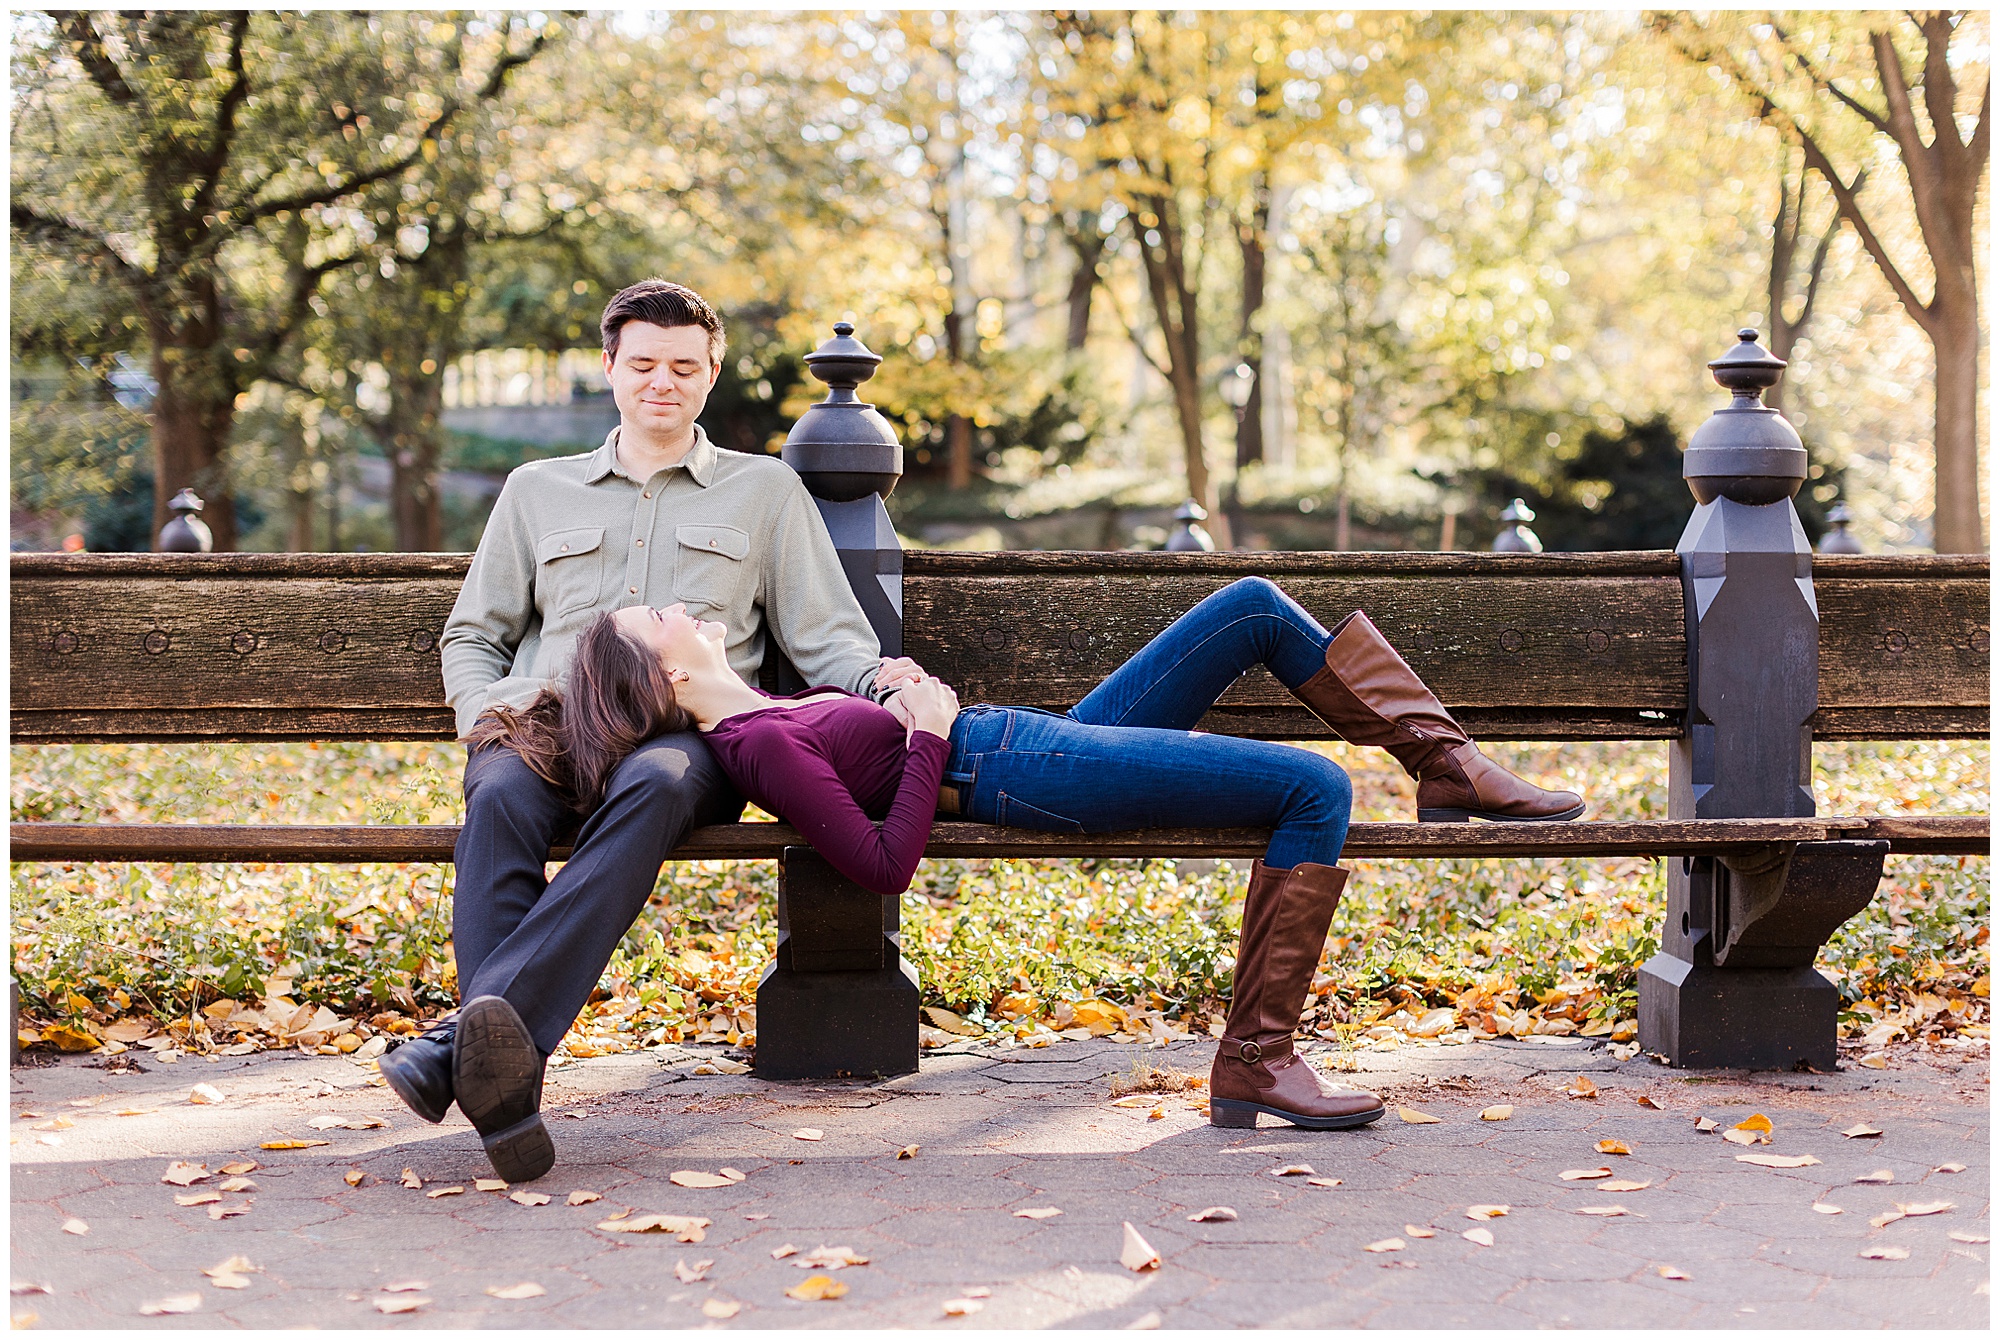 Stunning Engagement Photoshoot in Central Park